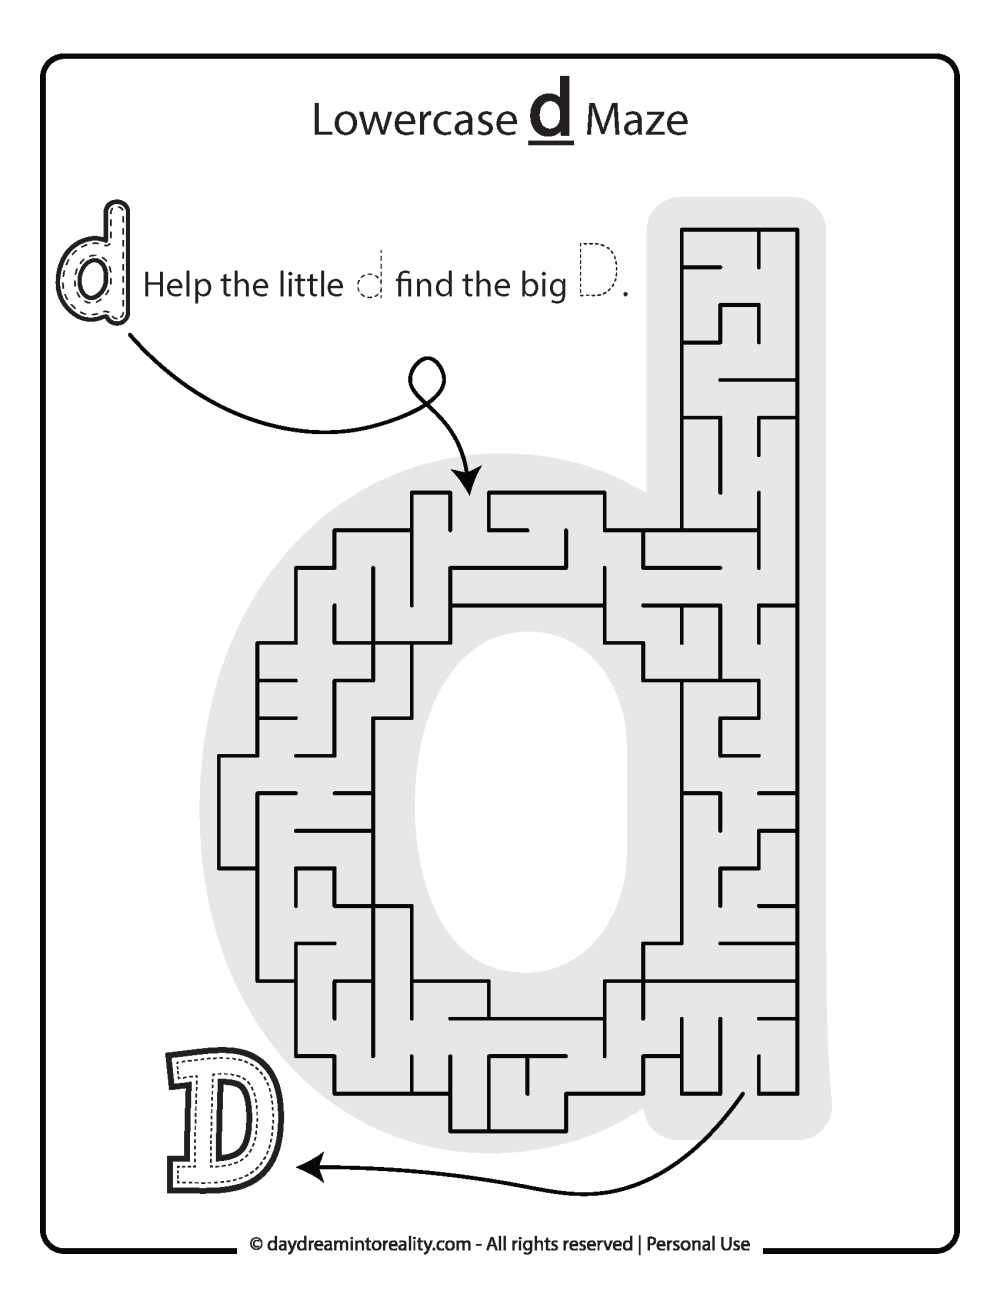 Lowercase Letter "d" Maze Free Printable